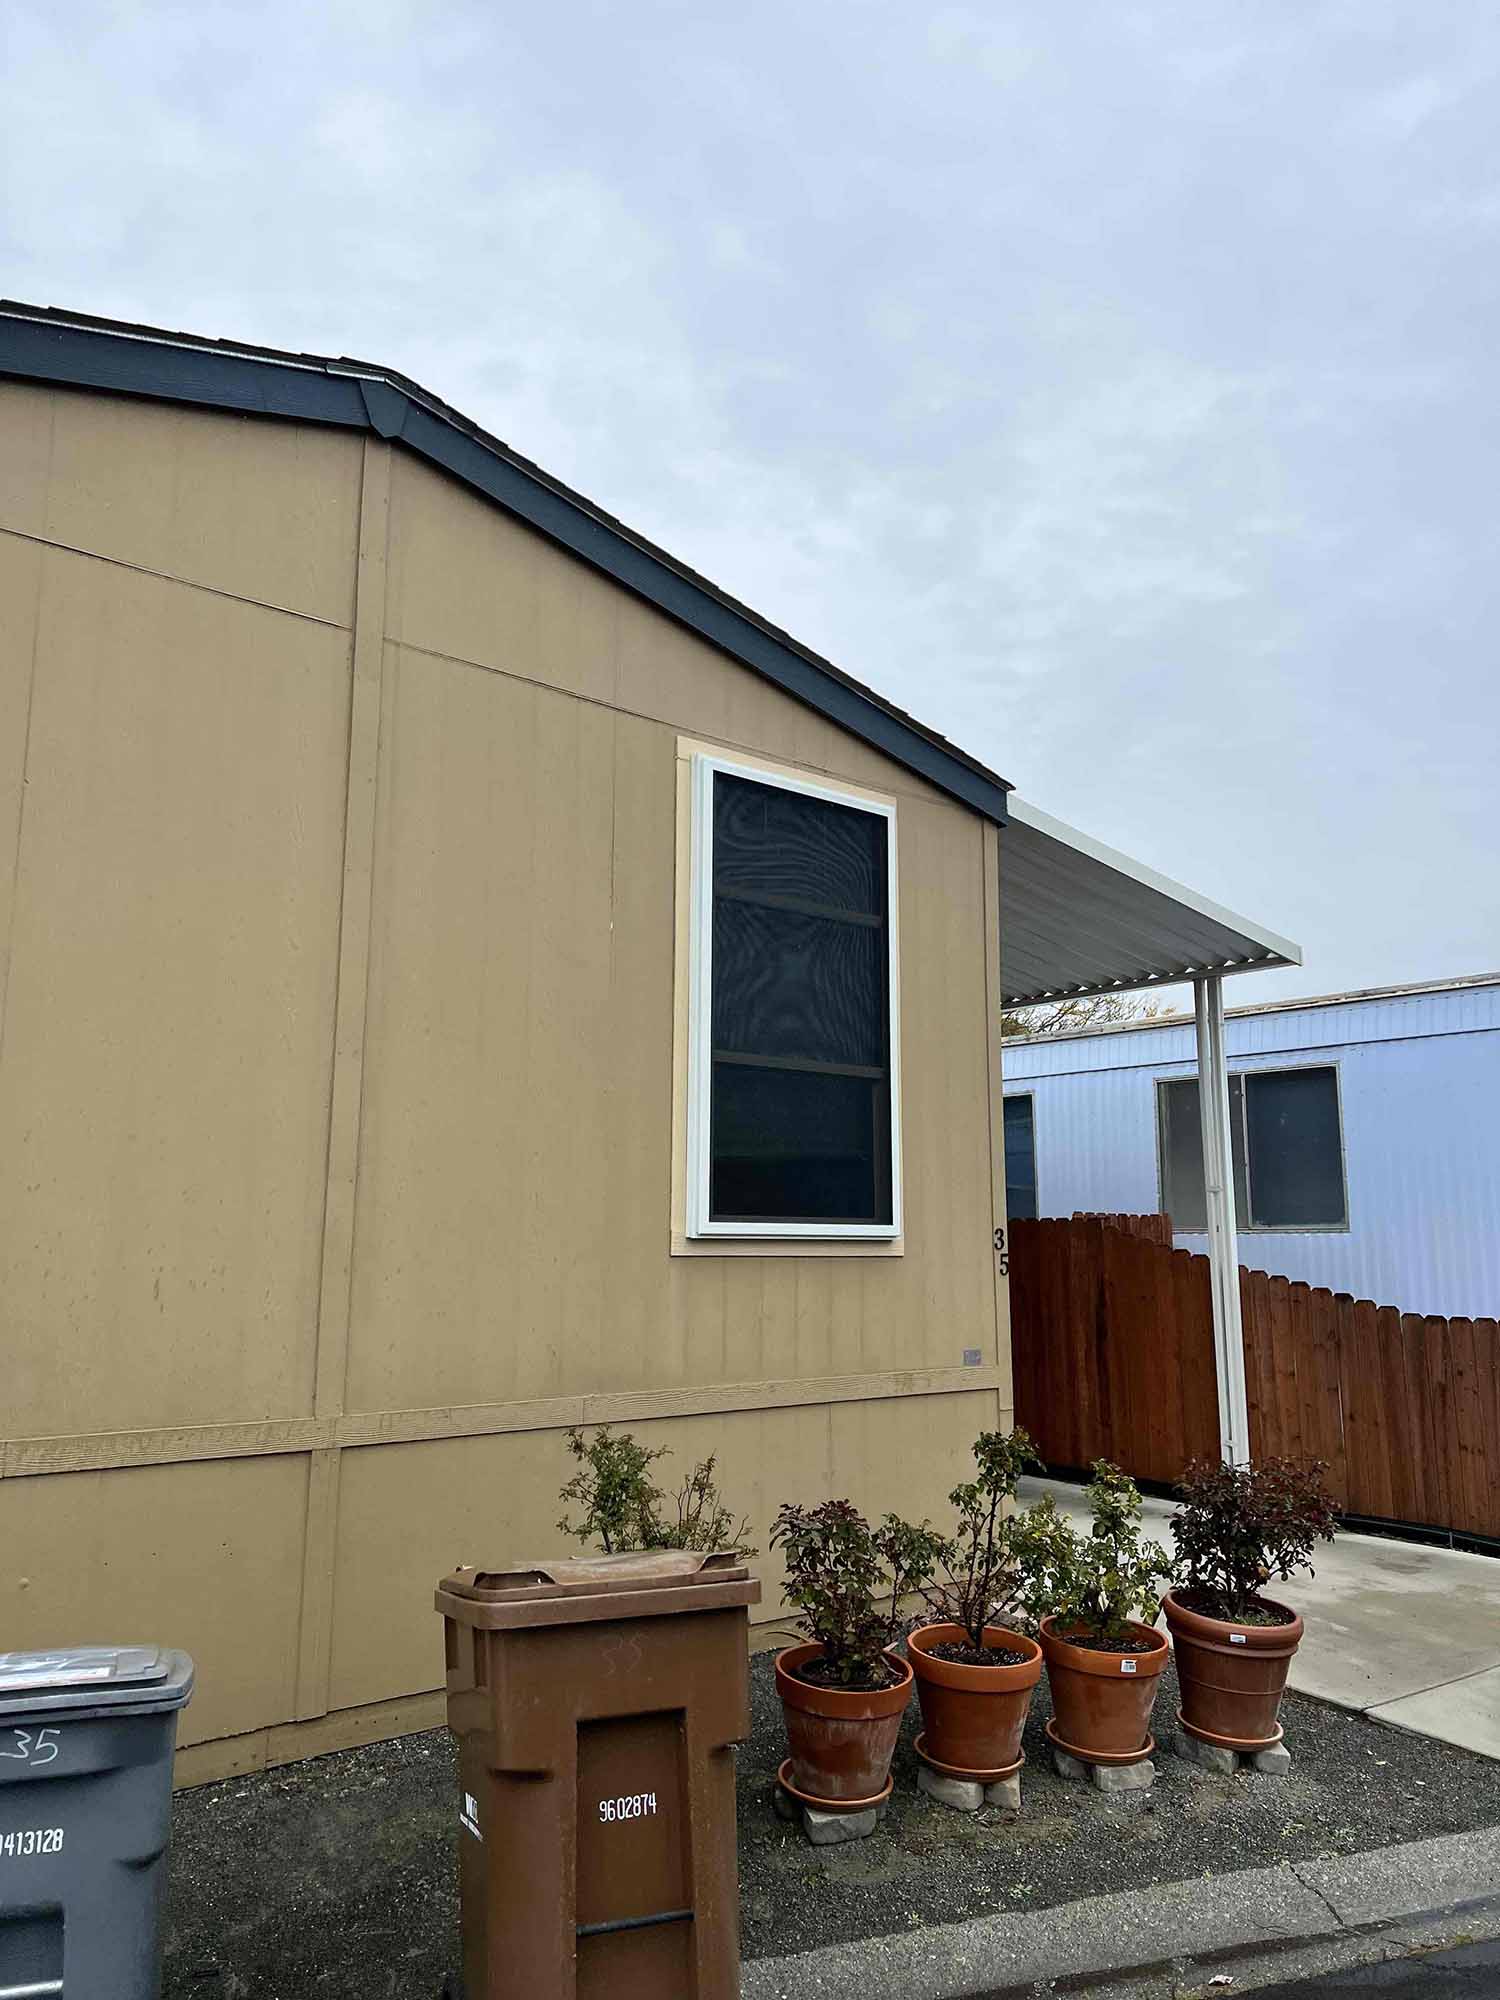 Crimsafe Security Screens for American Canyon Homes. Get a free estimate from ClimatePro.